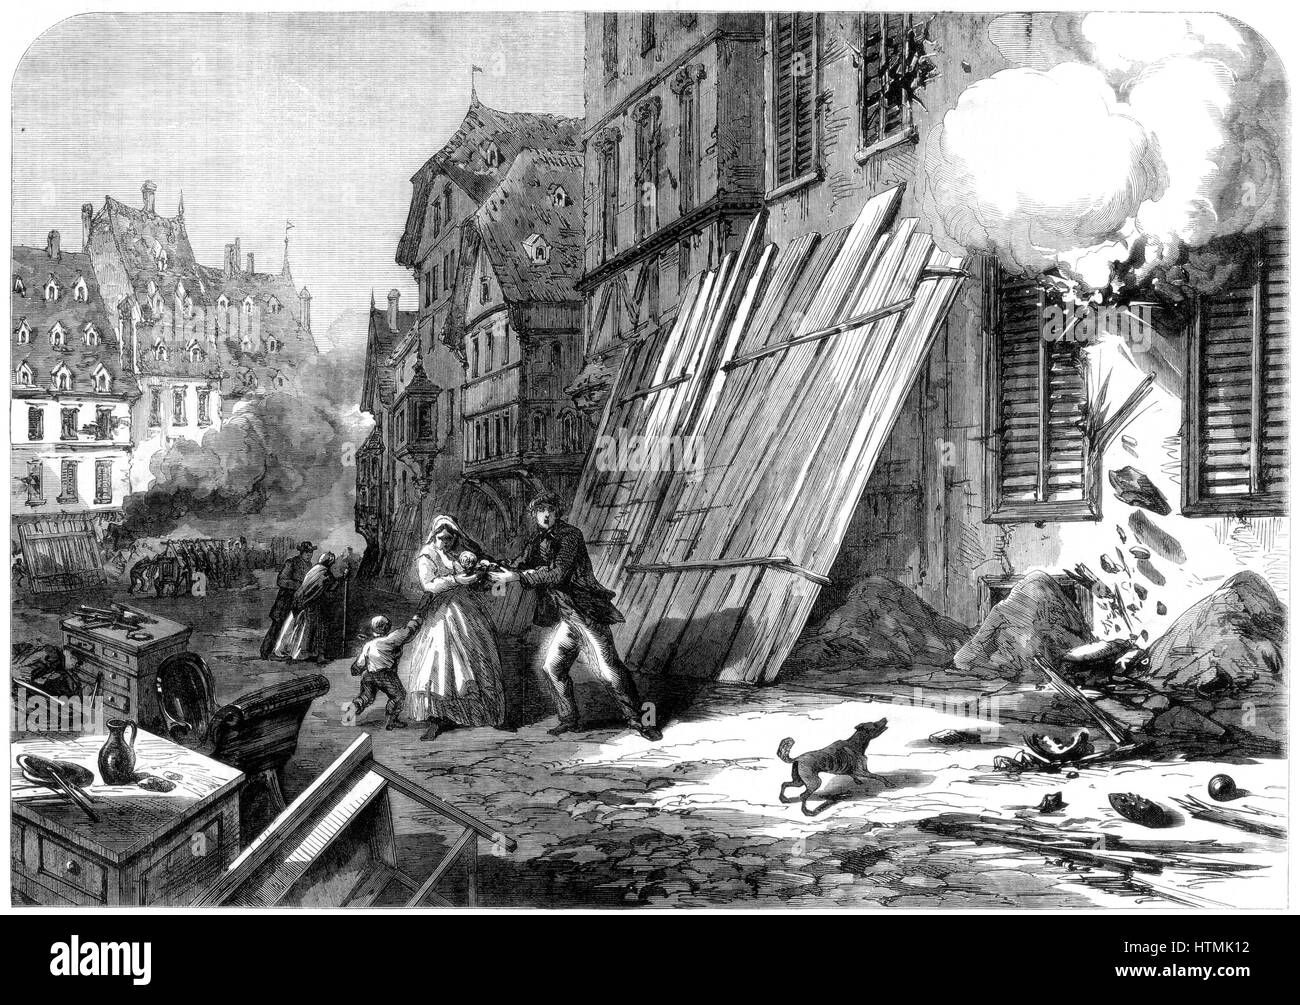 Franco-Prussian War 1870-1871: A street in Strasbourg during the siege and bombardment, 1870. From 'The Illustrated London News'. (London, 15 October 1870). Wood engraving. France. Germany. Stock Photo